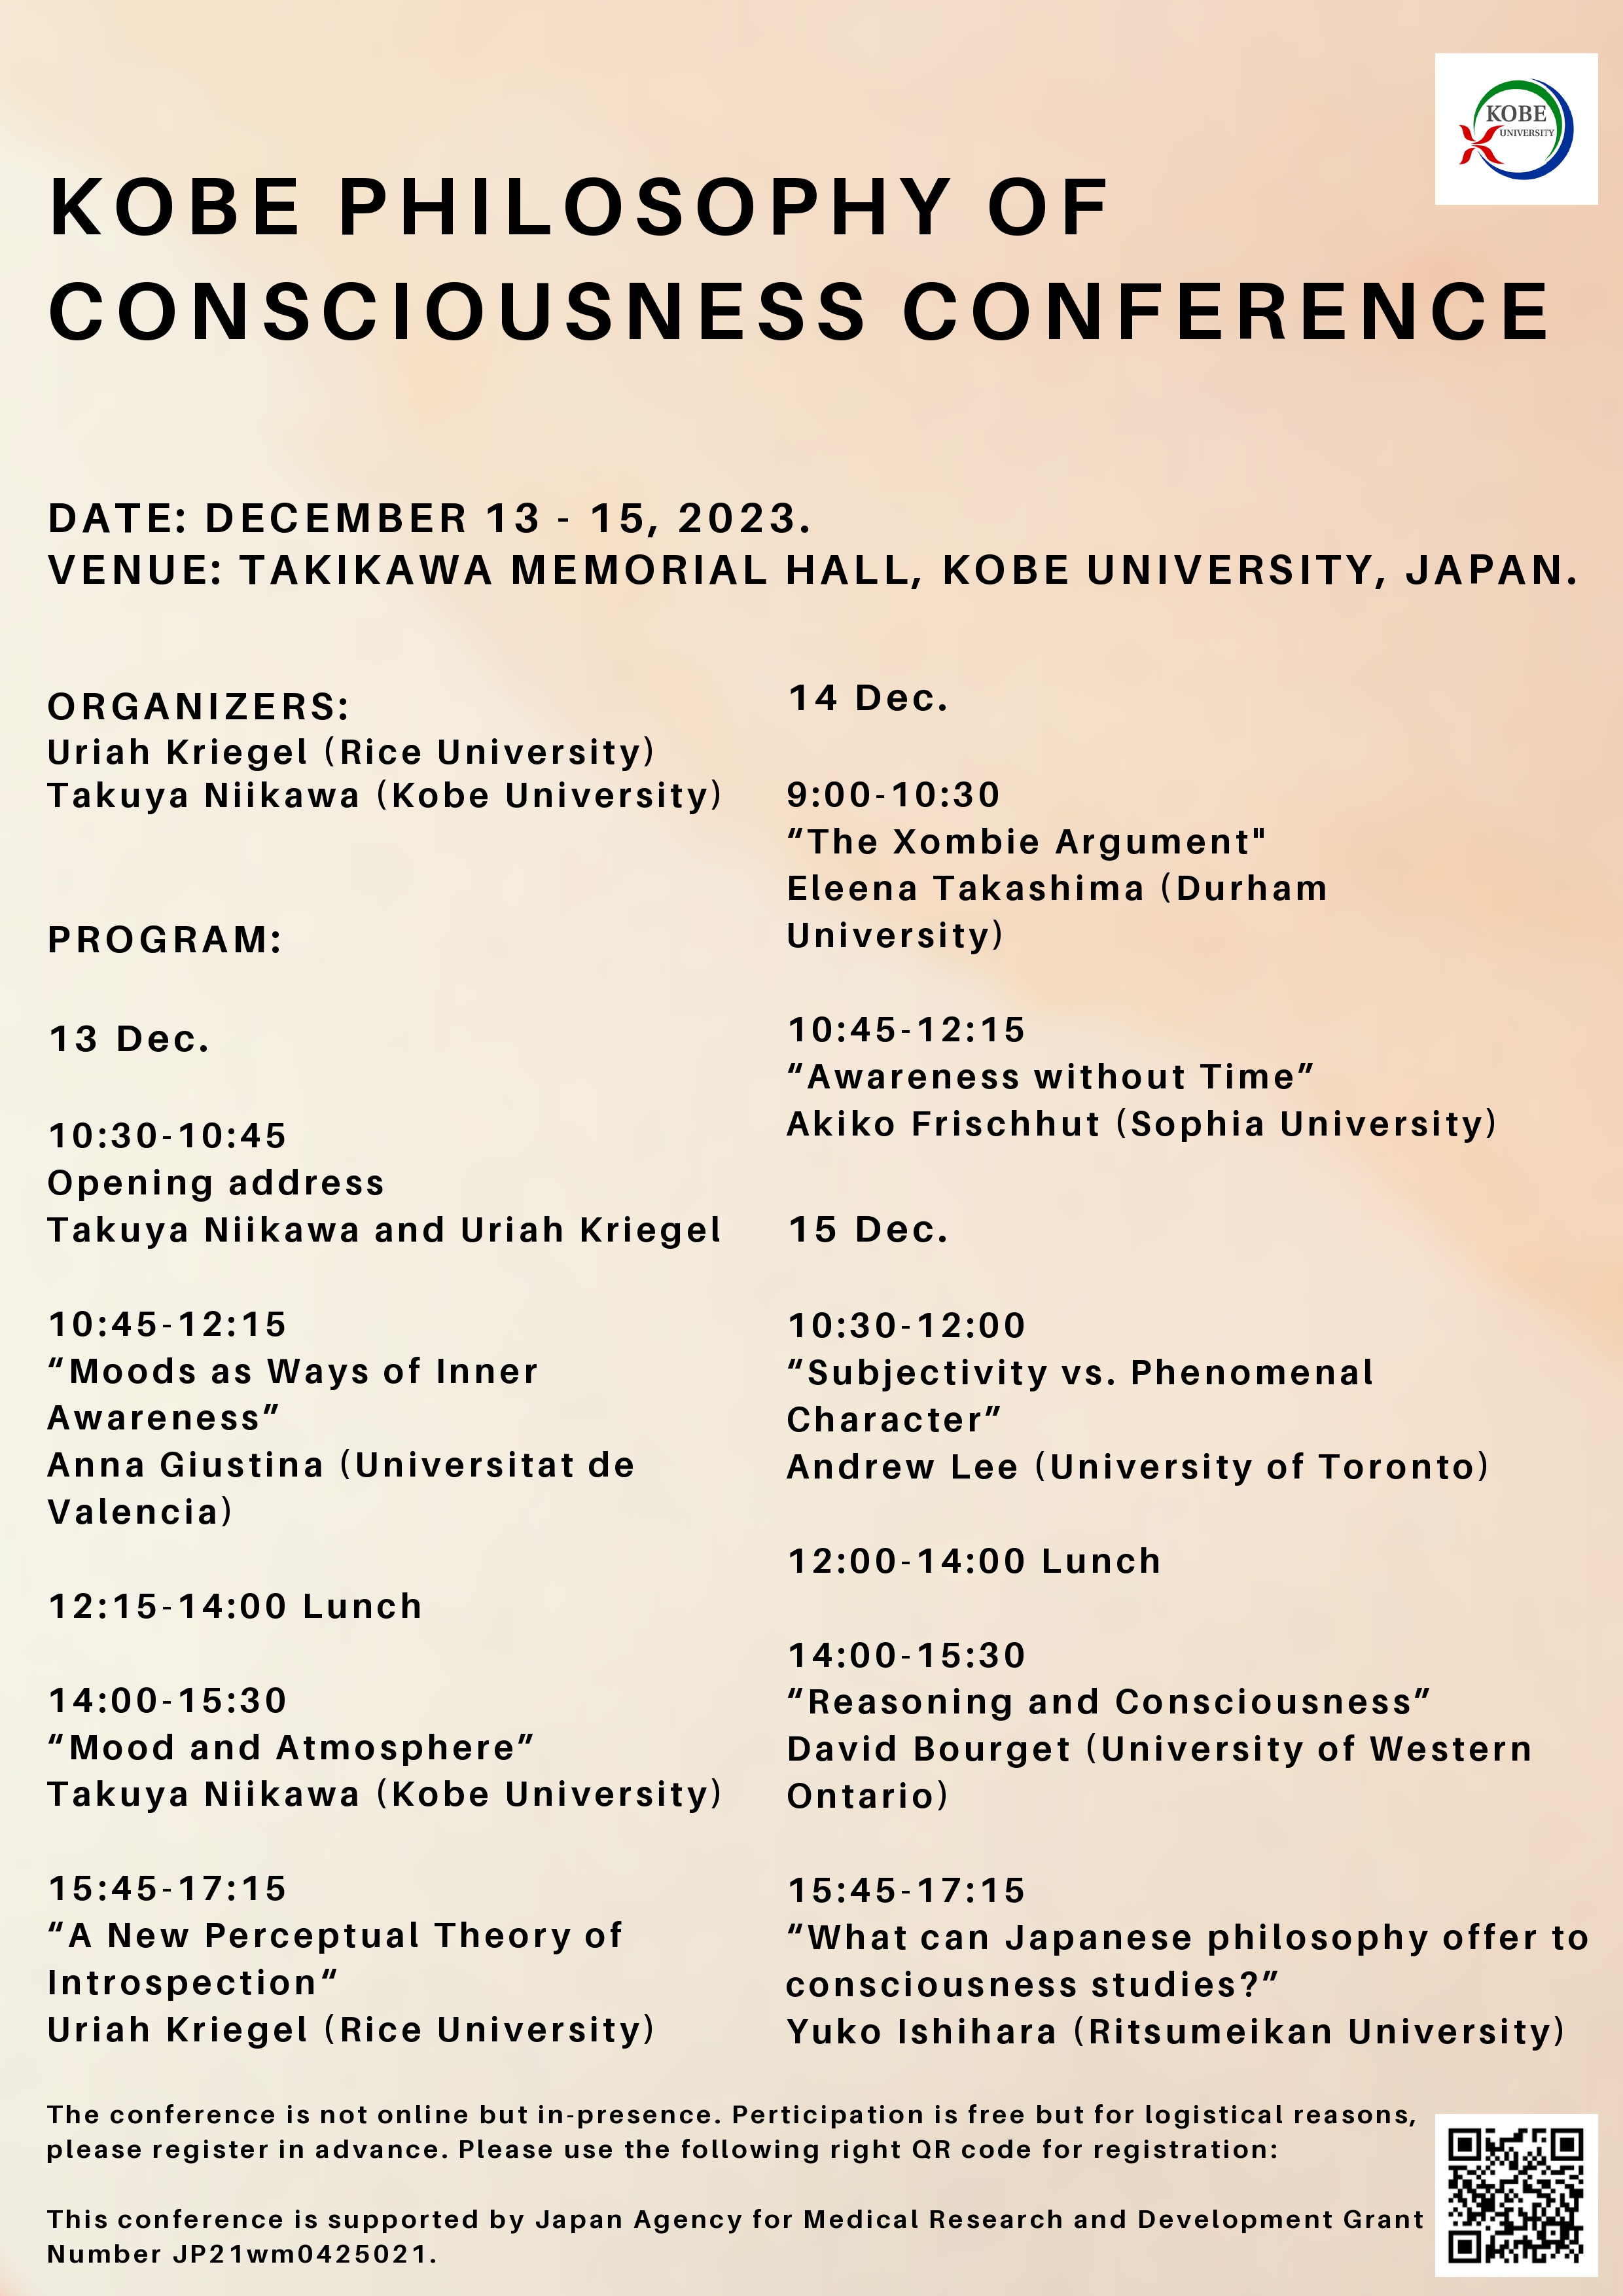 KOBE PHILOSOPHY OF CONSCIOUSNESS CONFERENCE